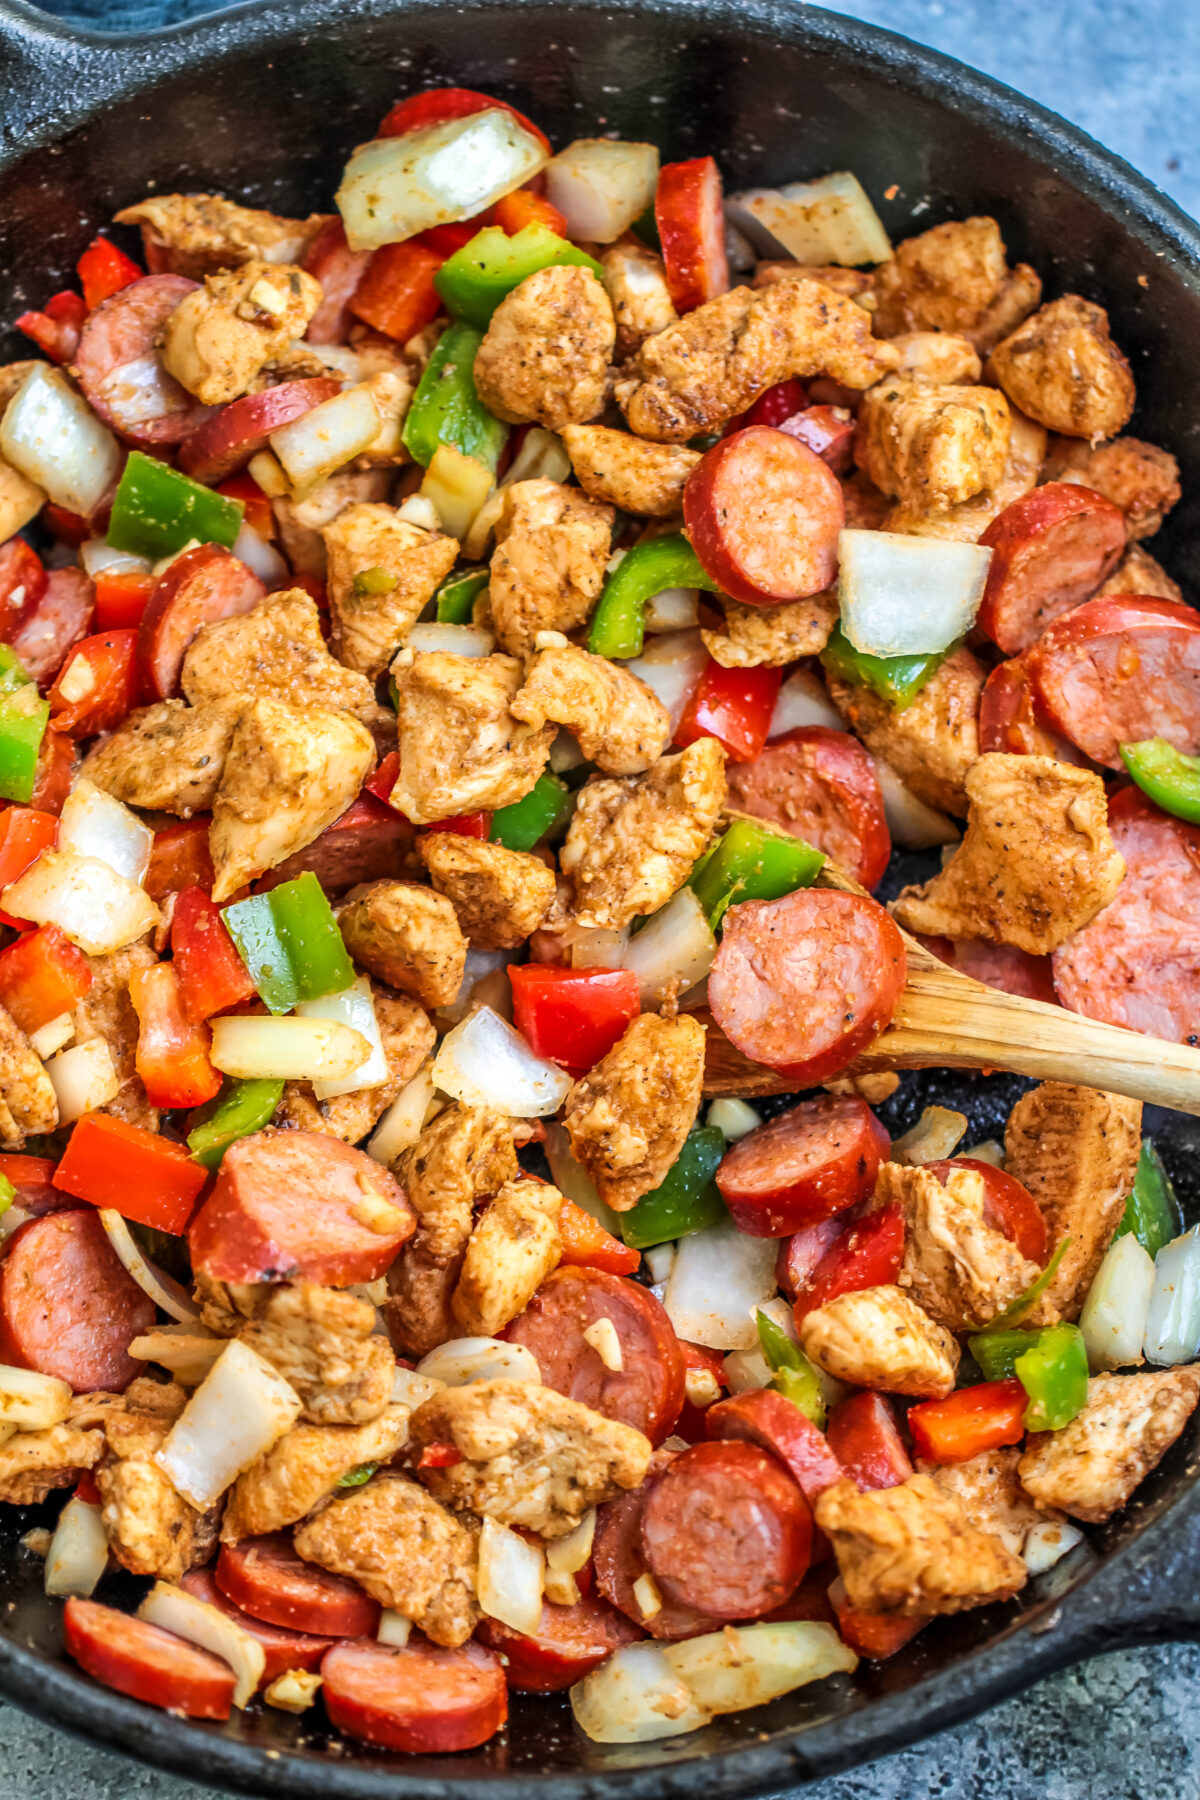 Chicken and veggies cooking in skillet.